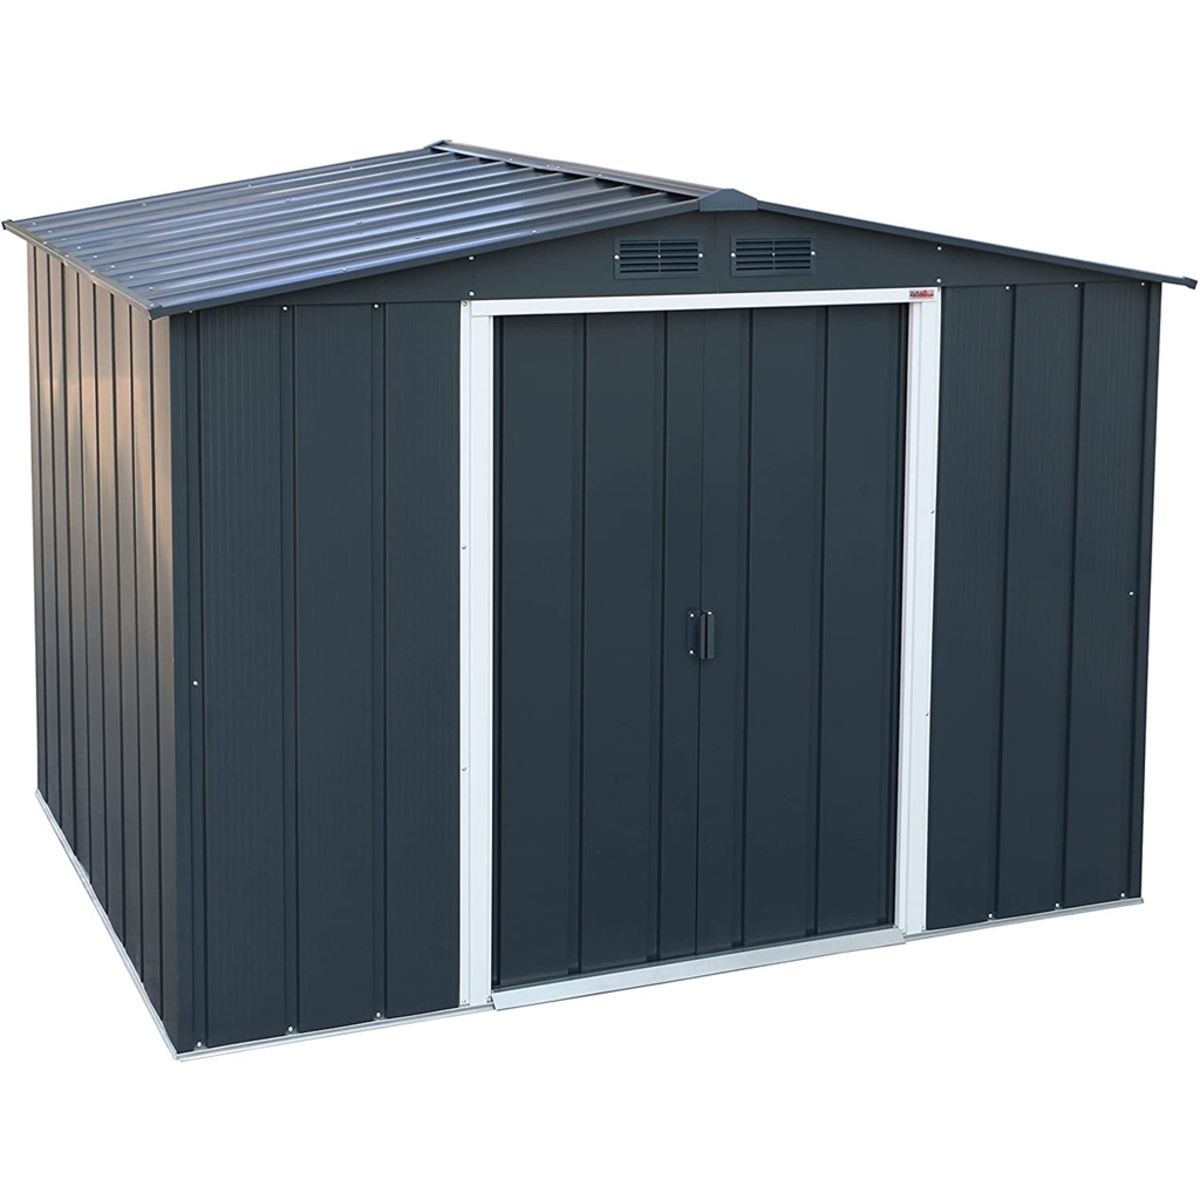 How To Paint A Metal Shed